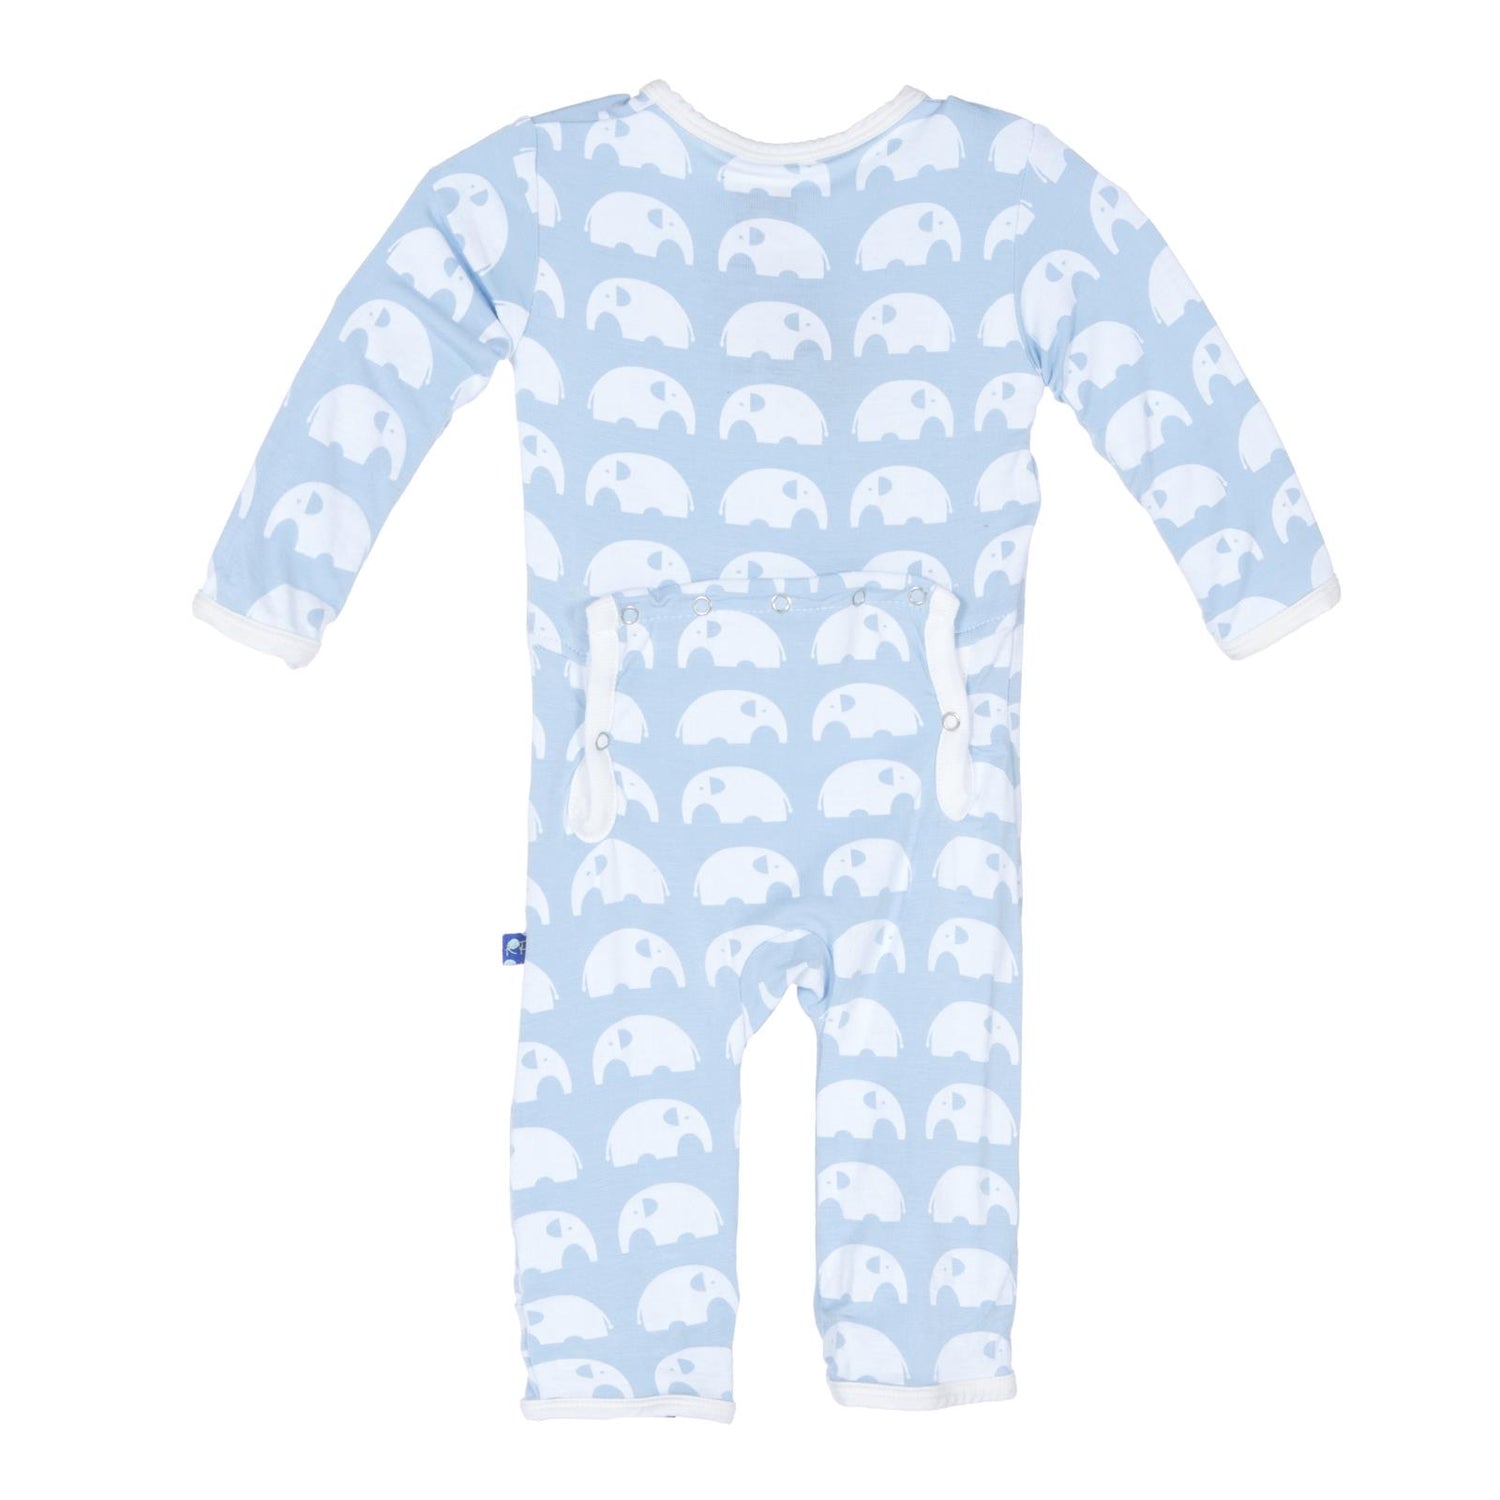 Print Coverall with Snaps in Pond Elephant